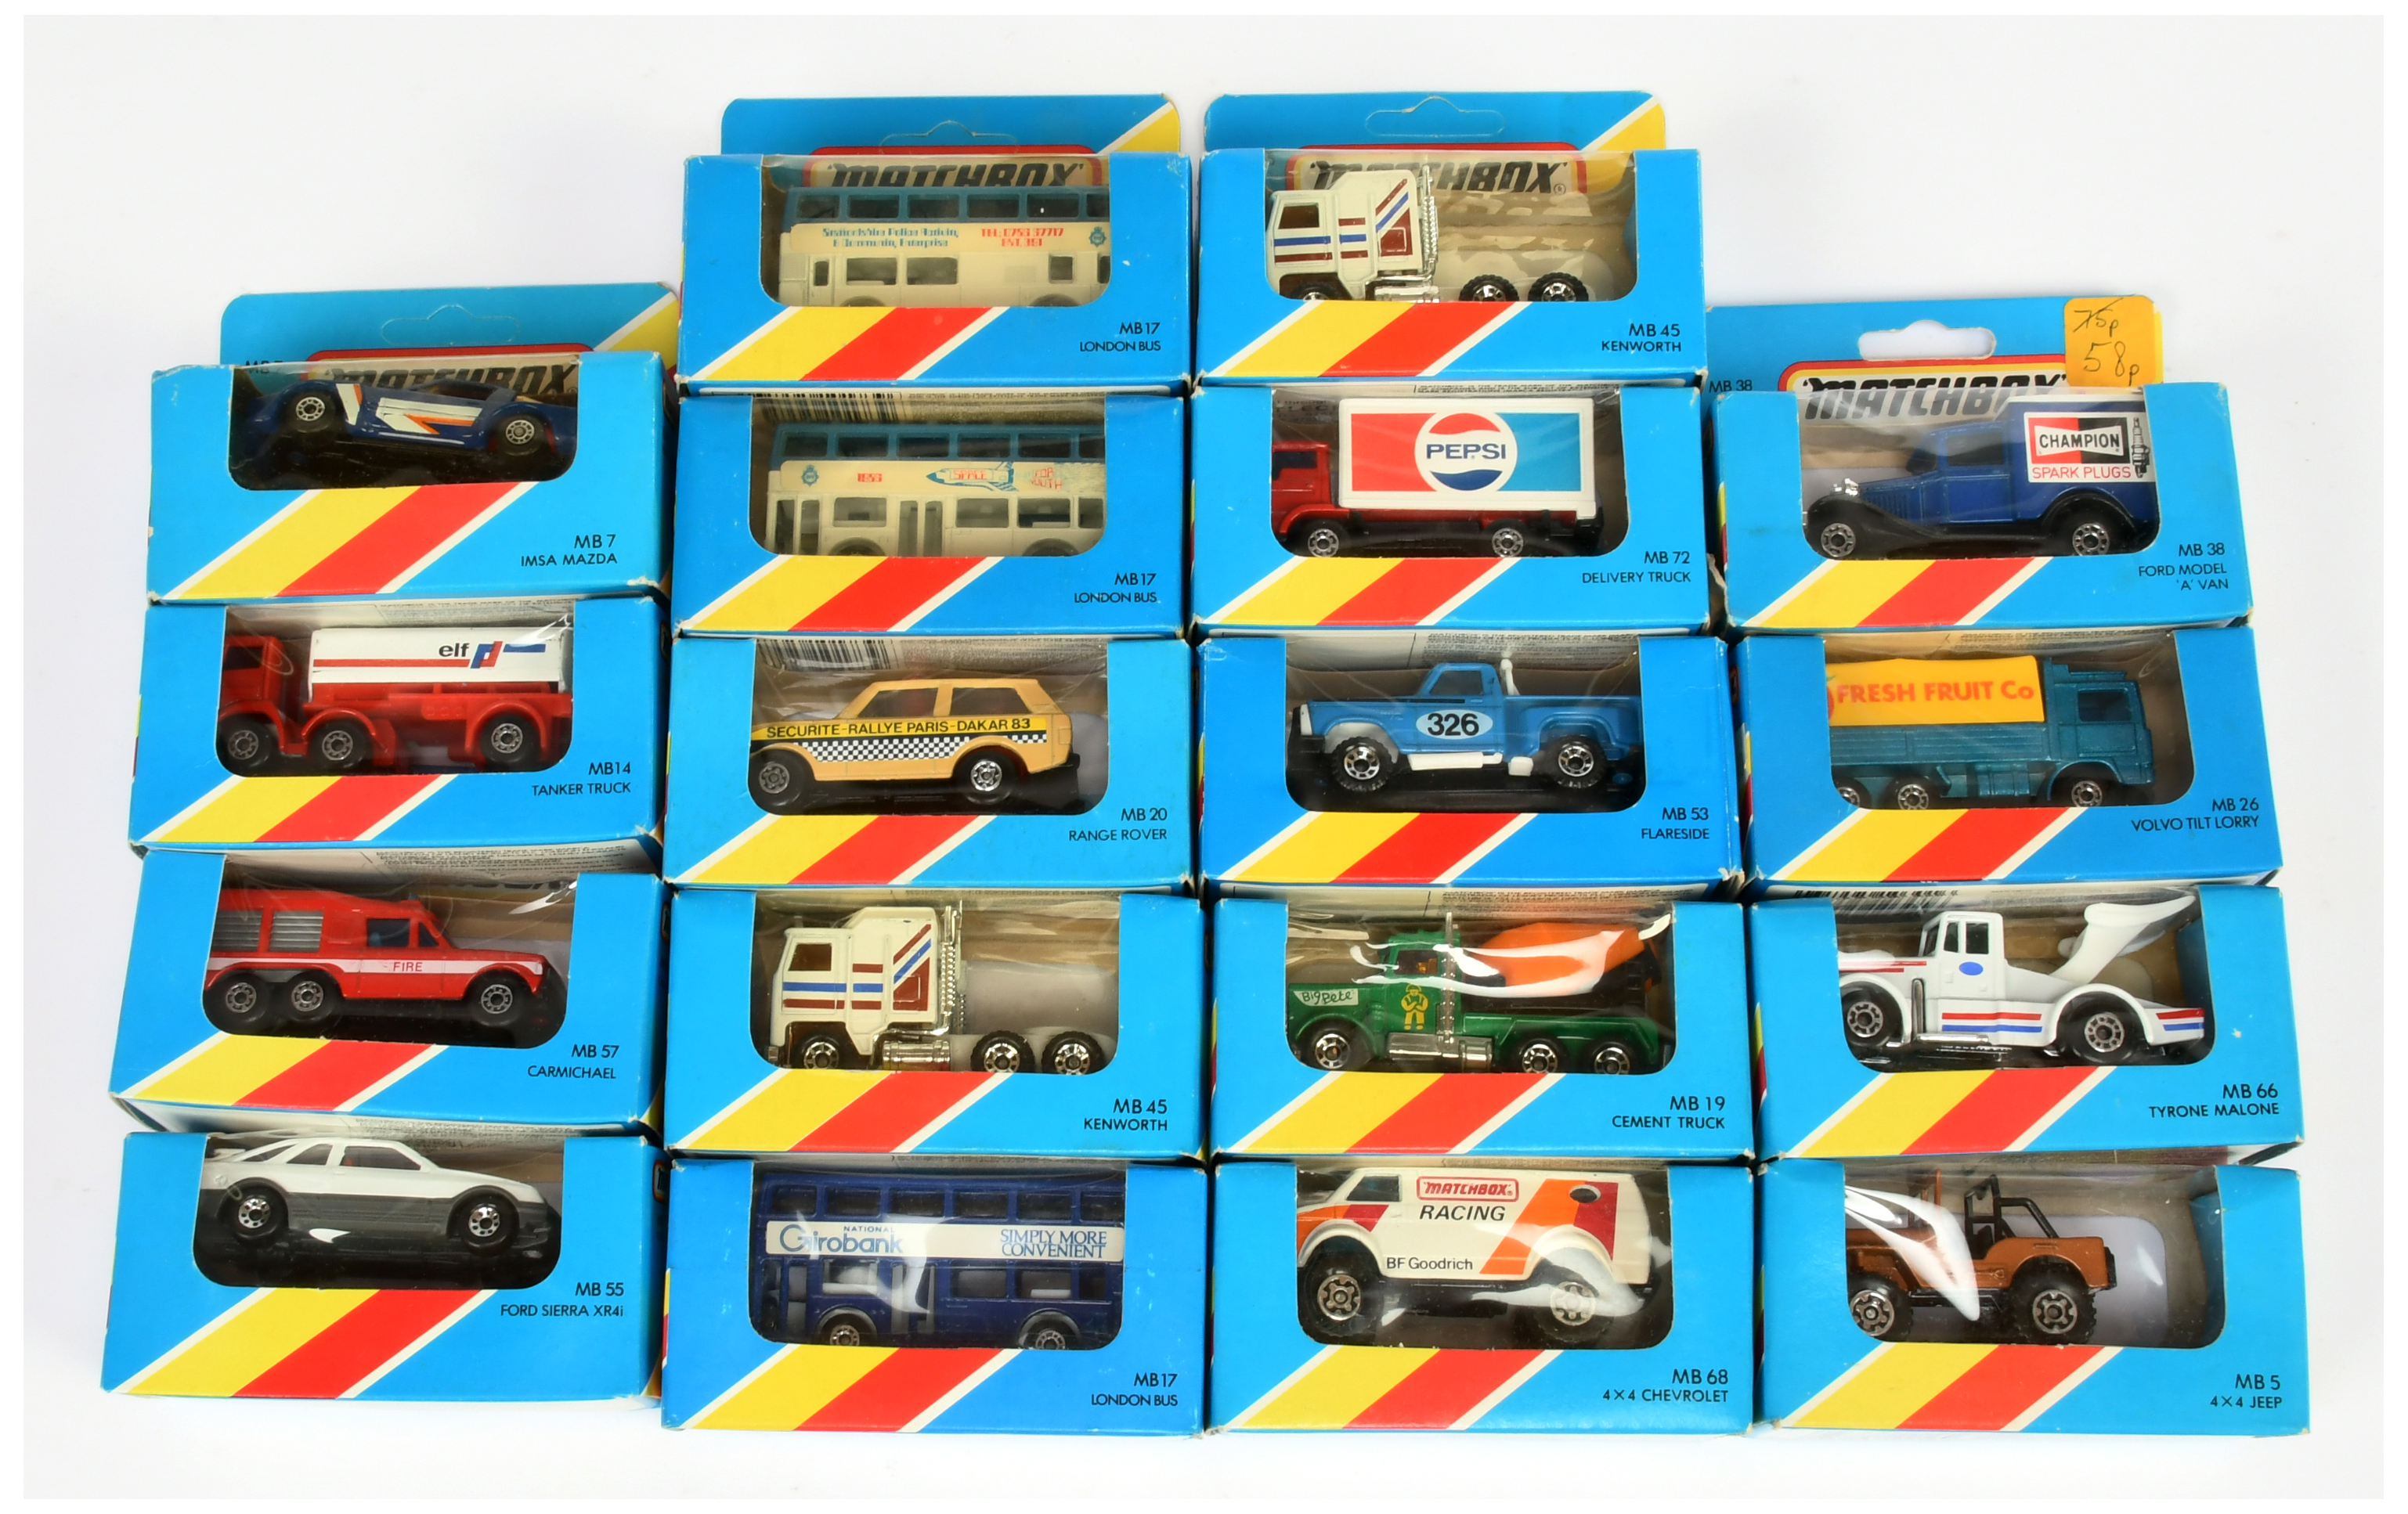 Matchbox Superfast A Group of 1980's issues To Include - MB14 Petrol Tanker "ELF", MB55 Ford Sier...